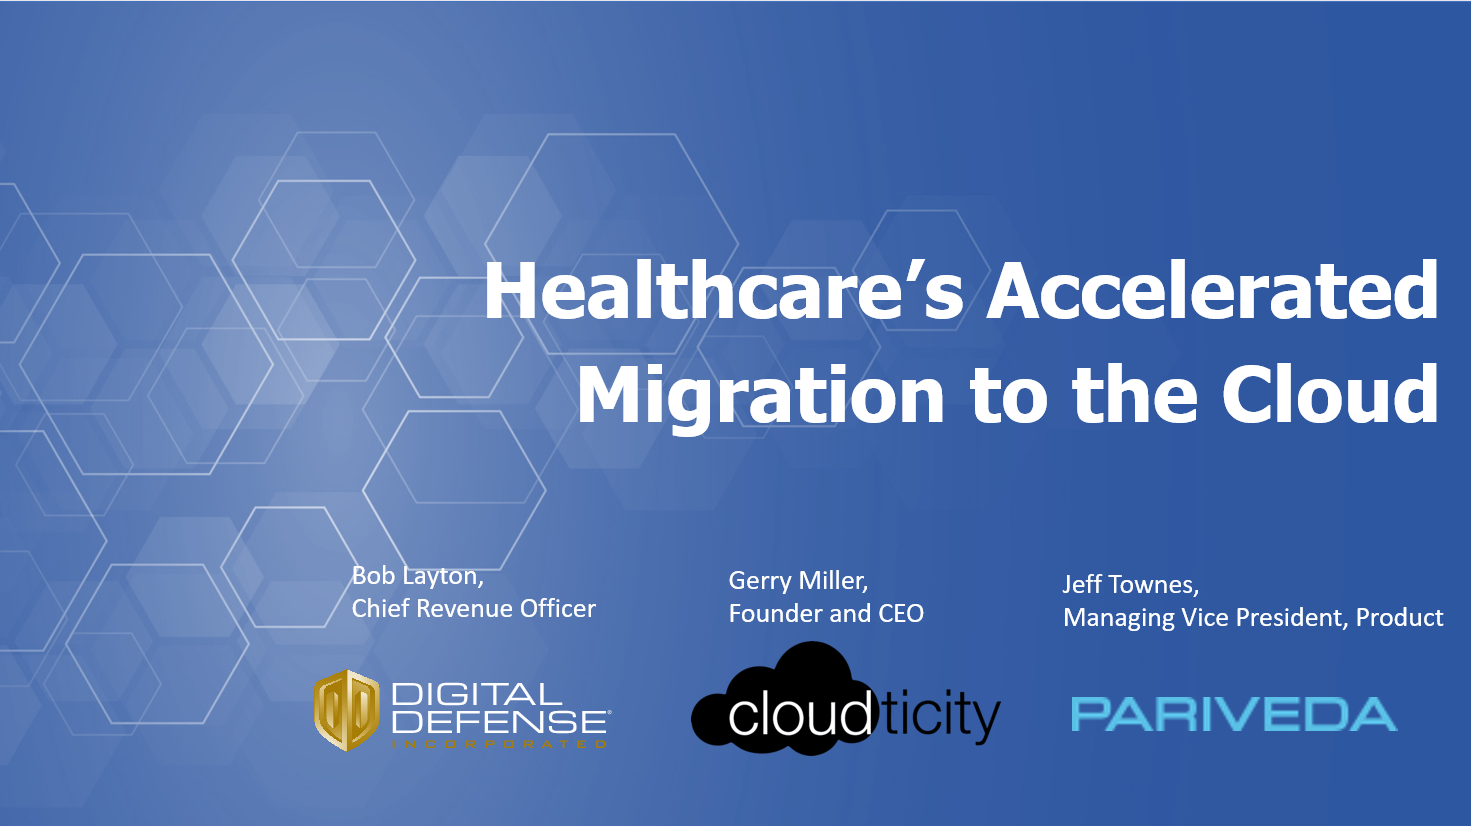 Healthcare Sector’s Accelerated Cloud Migration podcast pic 7.8.20